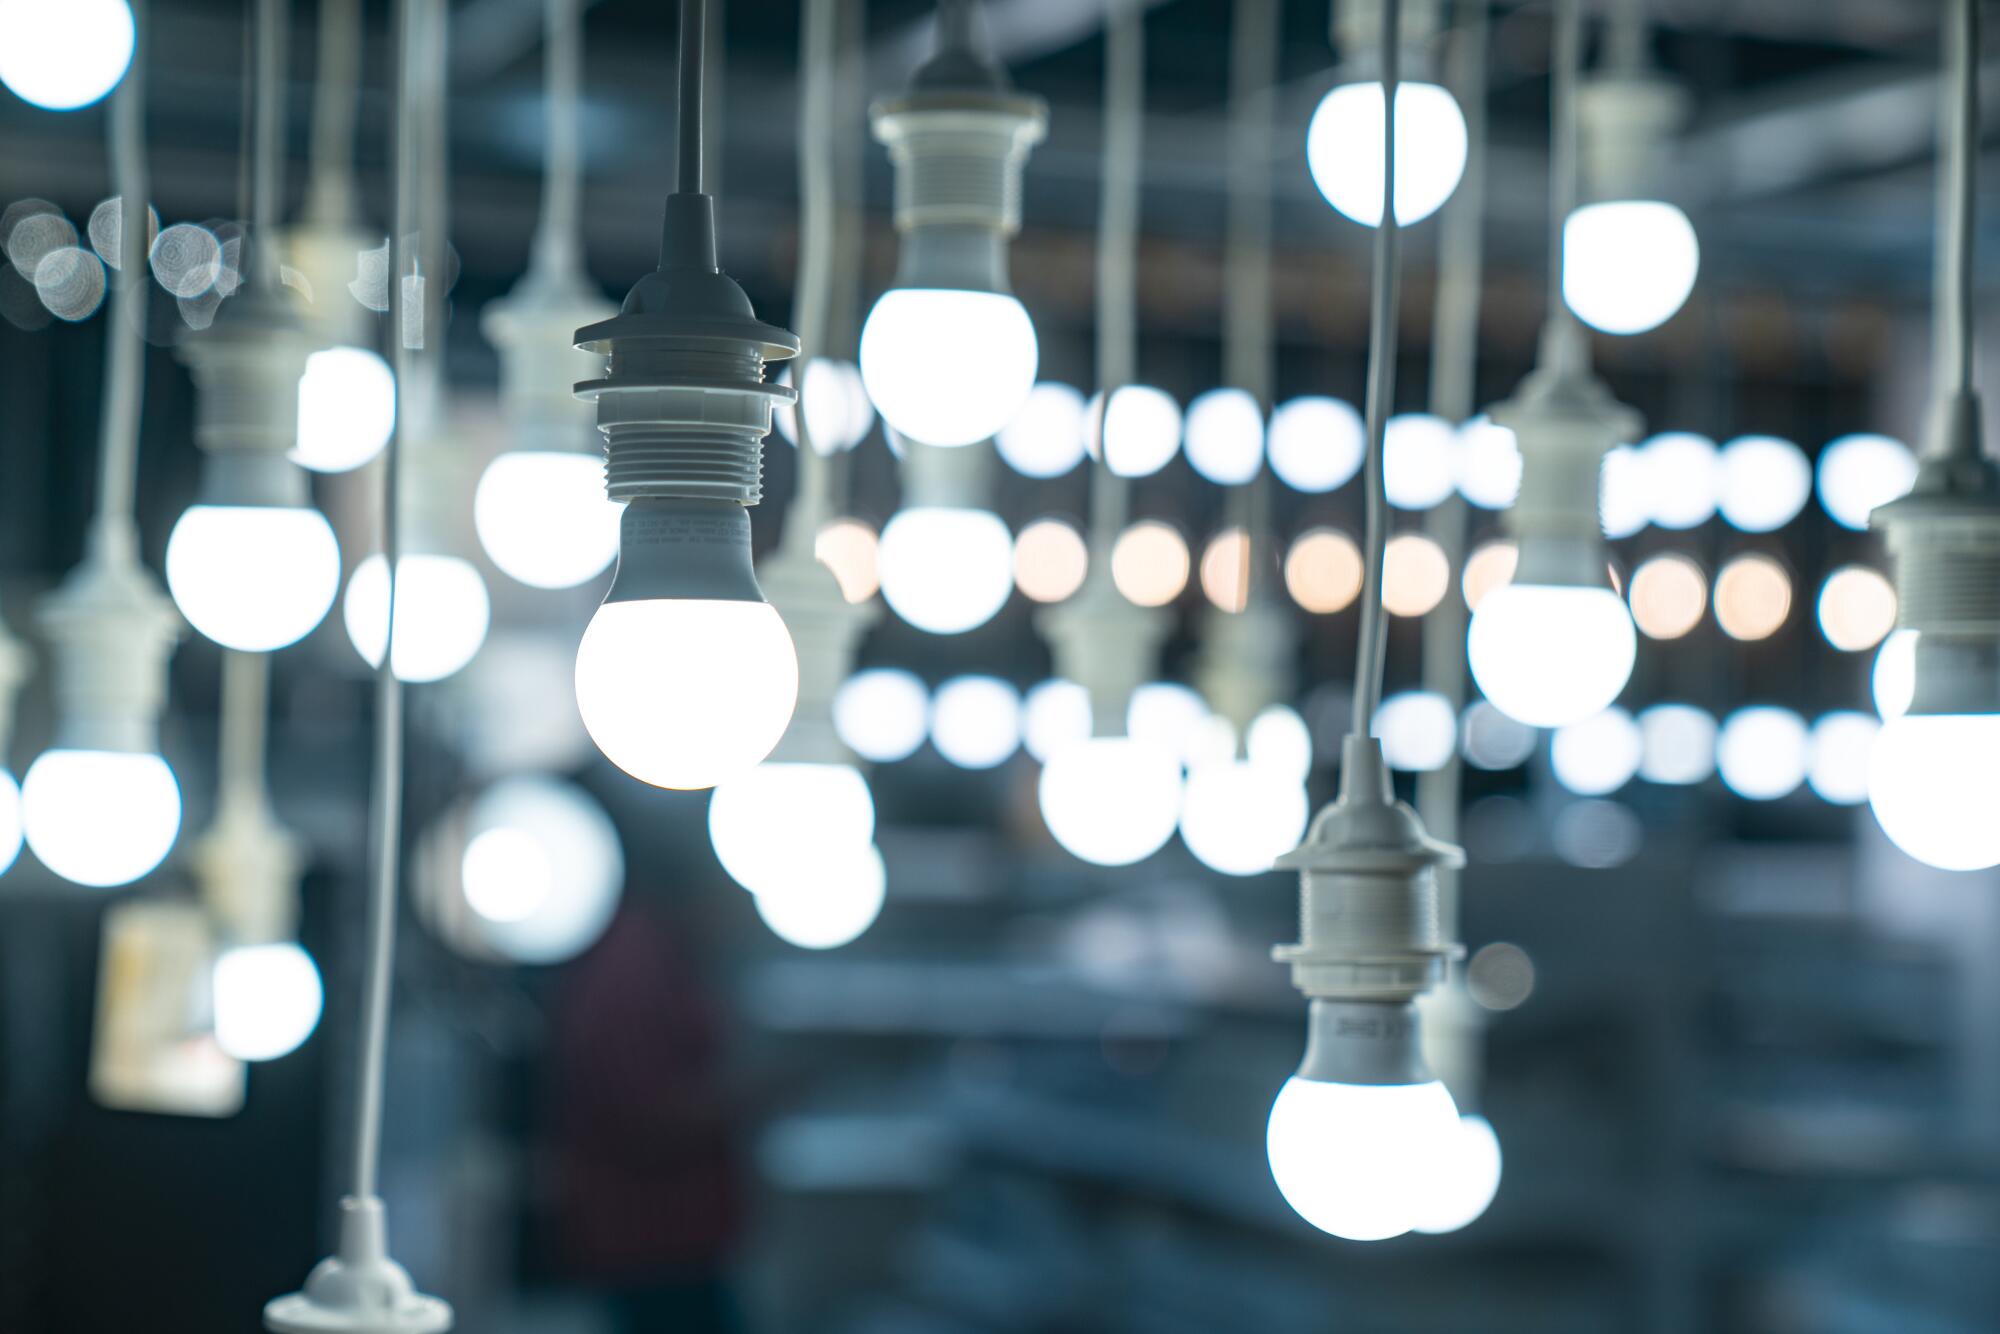 Compared to incandescent bulbs, LEDs produce light that is more bluish-white.